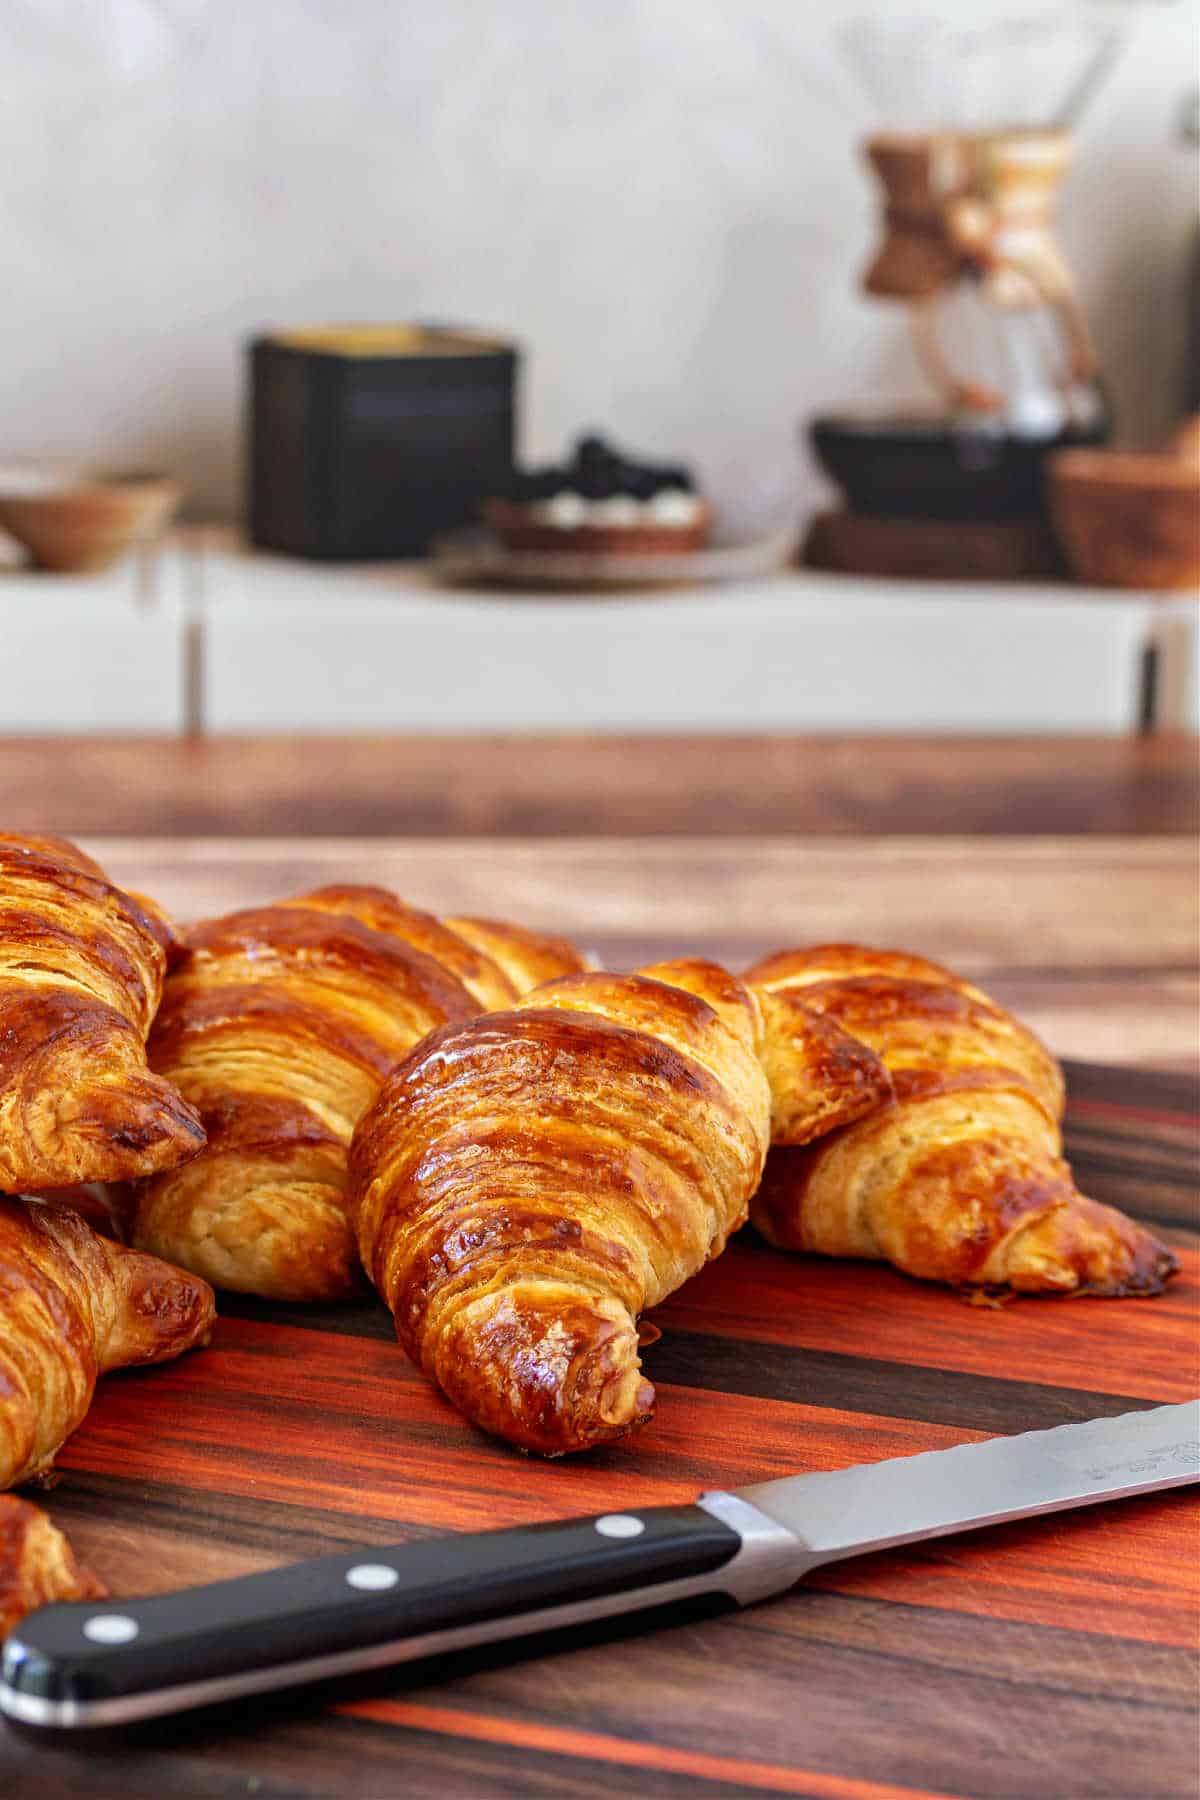 Several shiny and deep golden brown croissasnts on a cutting board with a bread knife.